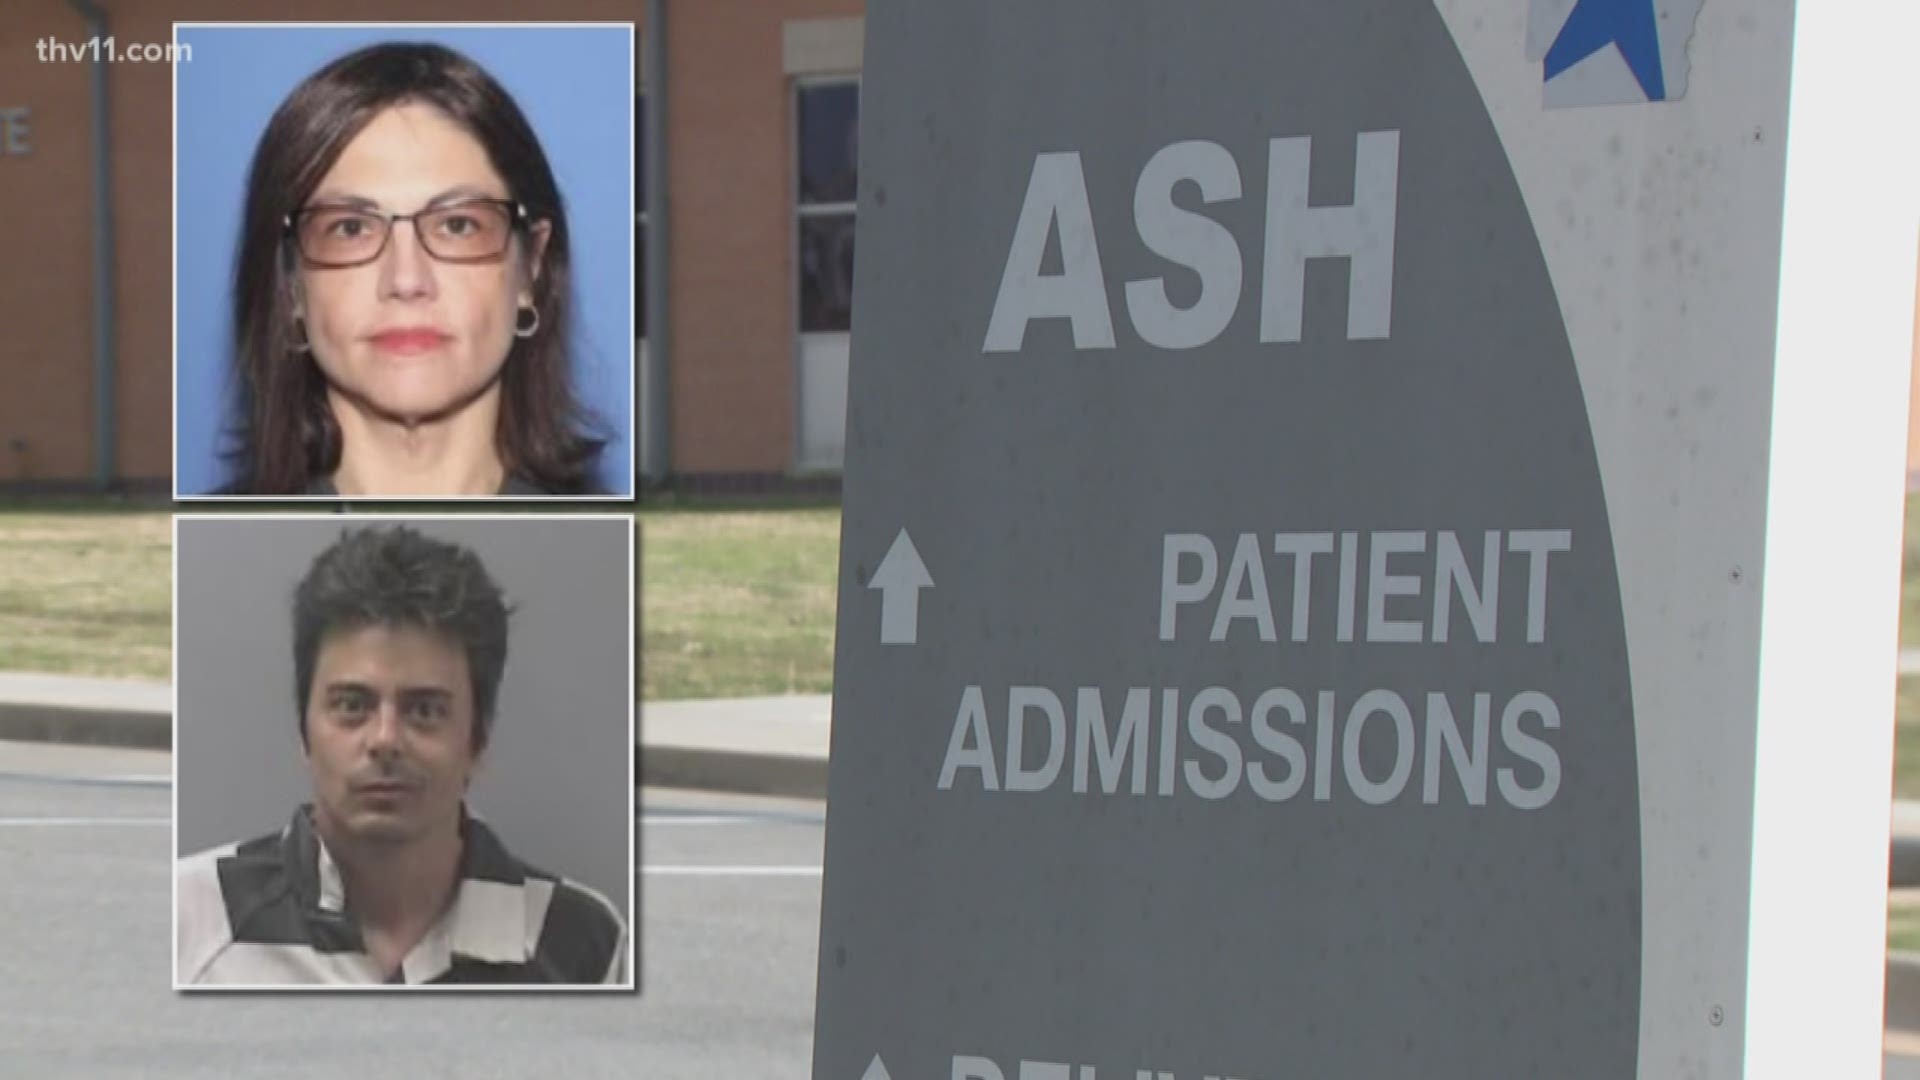 The therapist accused of helping a patient escape the Arkansas State Hospital has pleaded "not guilty" in court.